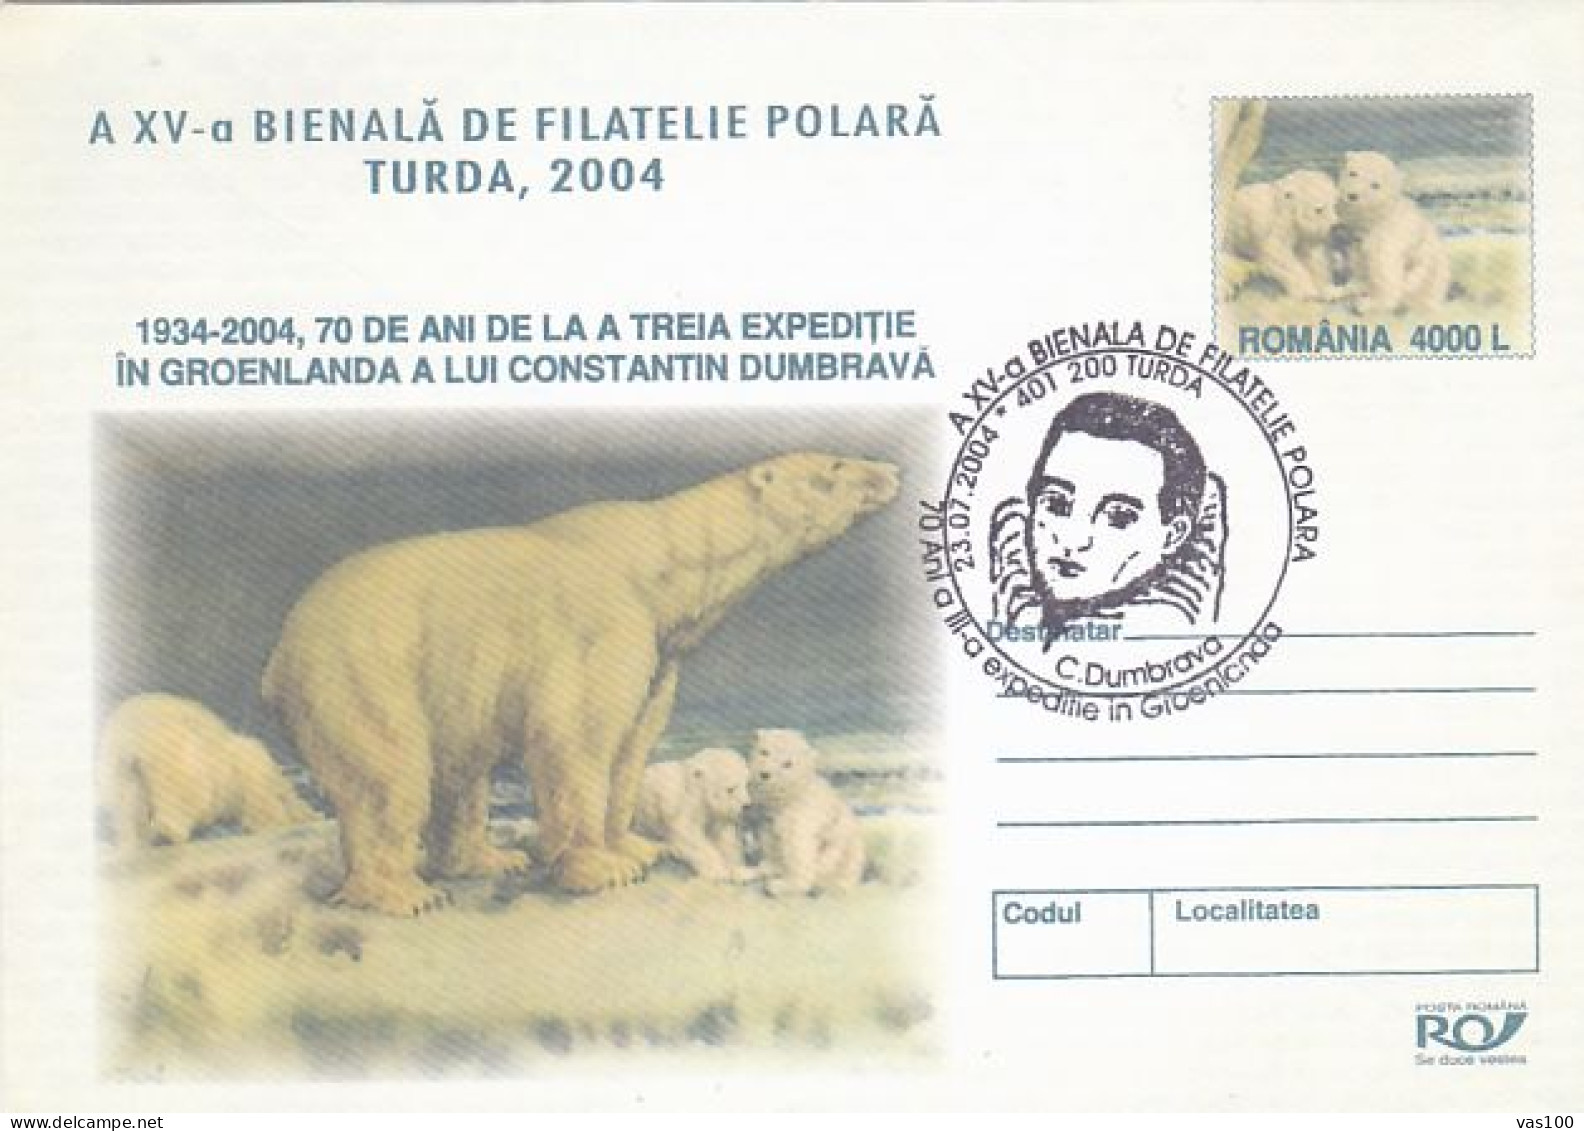 NORTH POLE, ARCTIC EXPEDITION, C. DUMBRAVA IN GREENLAND, POLAR BEAR, COVER STATIONERY, ENTIER POSTAL, 2004, ROMANIA - Arctische Expedities